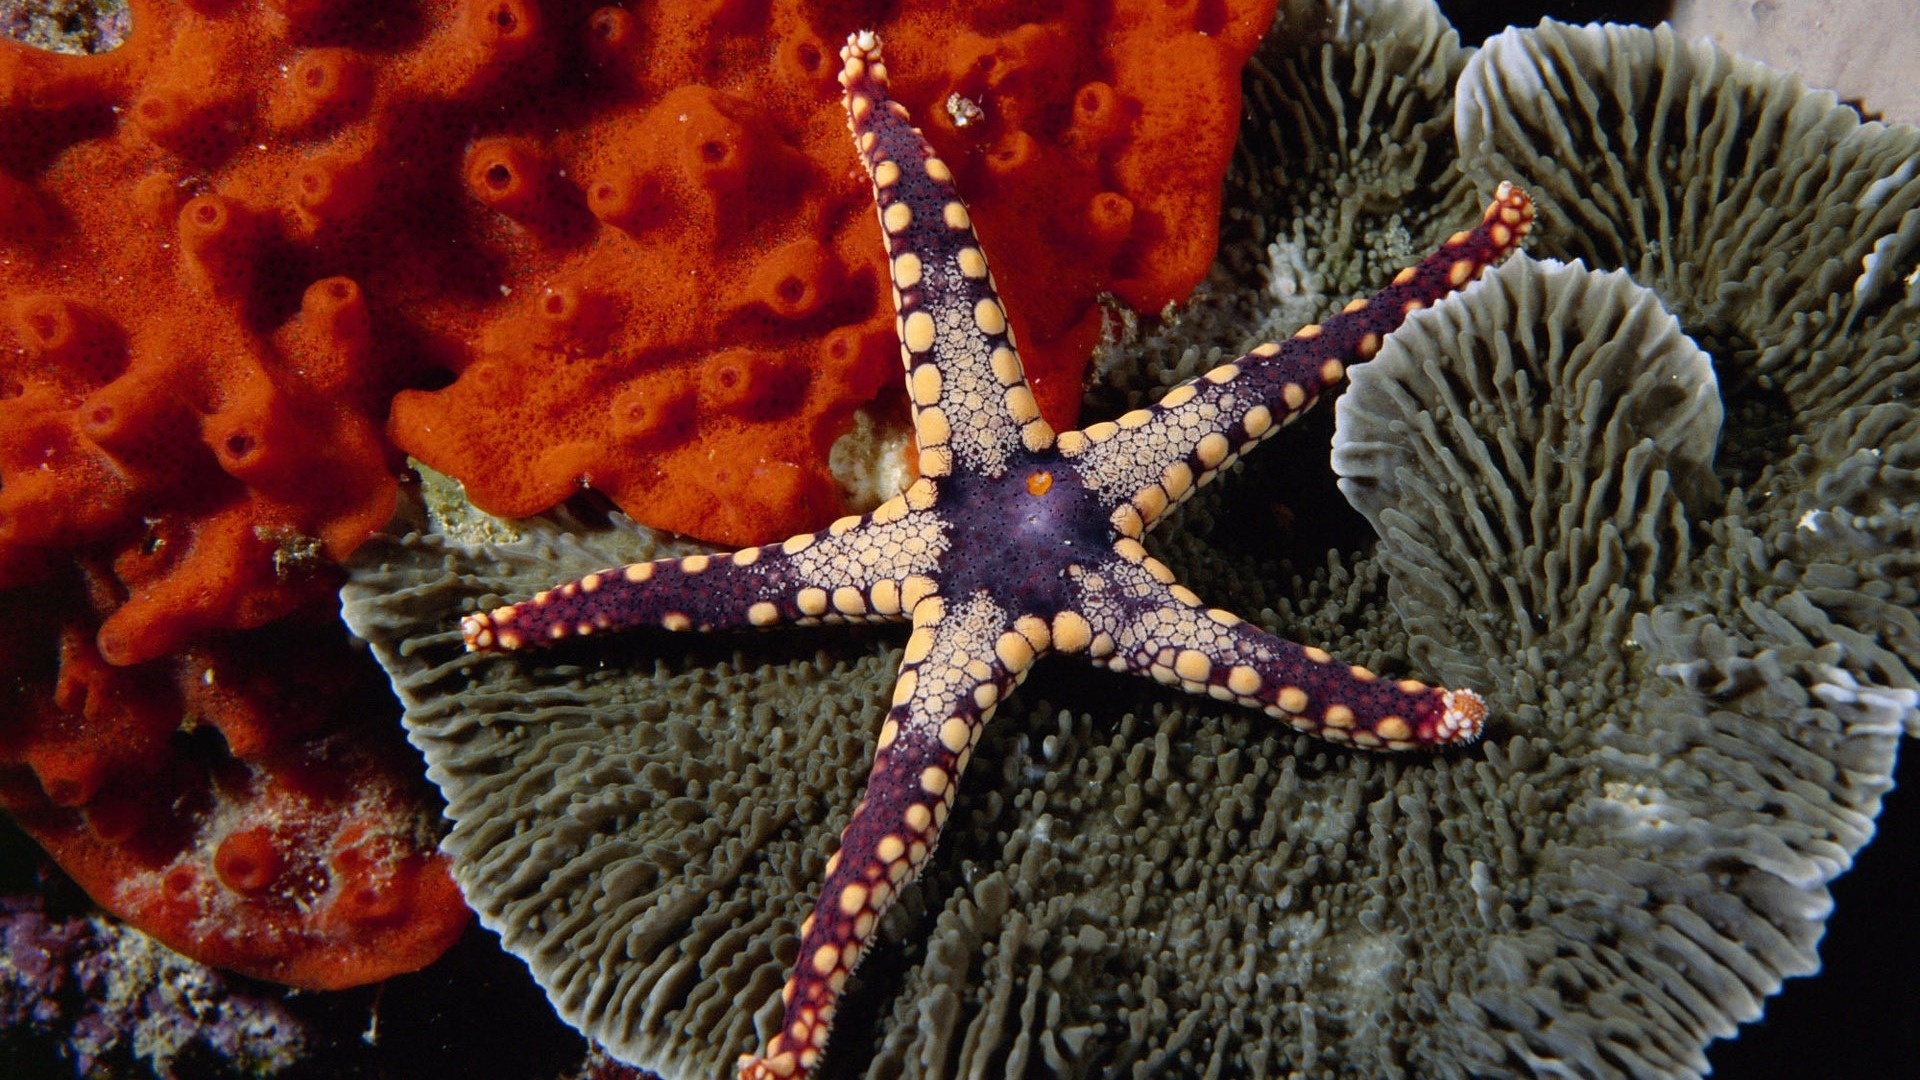 Sea Star: Have tiny eyespots on the tips of their arms, Coral. 1920x1080 Full HD Background.